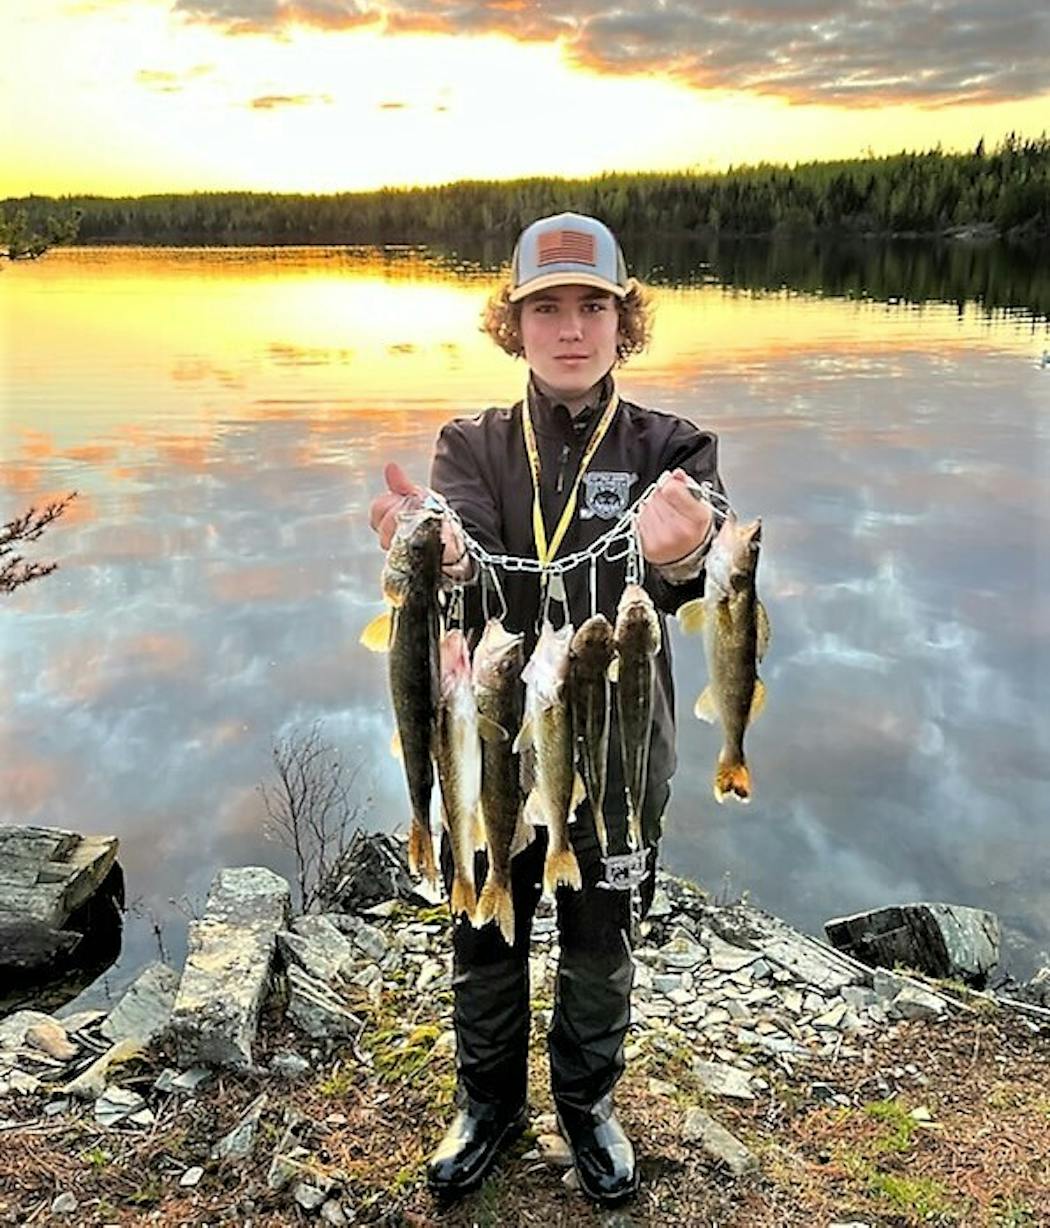 Joe Kennedy, 15, of Cottage Grove, with a stringer of walleyes caught by he and his dad on the first afternoon and evening of their trip to Ensign Lake. The fish were fried for dinner the next night for a group of five.